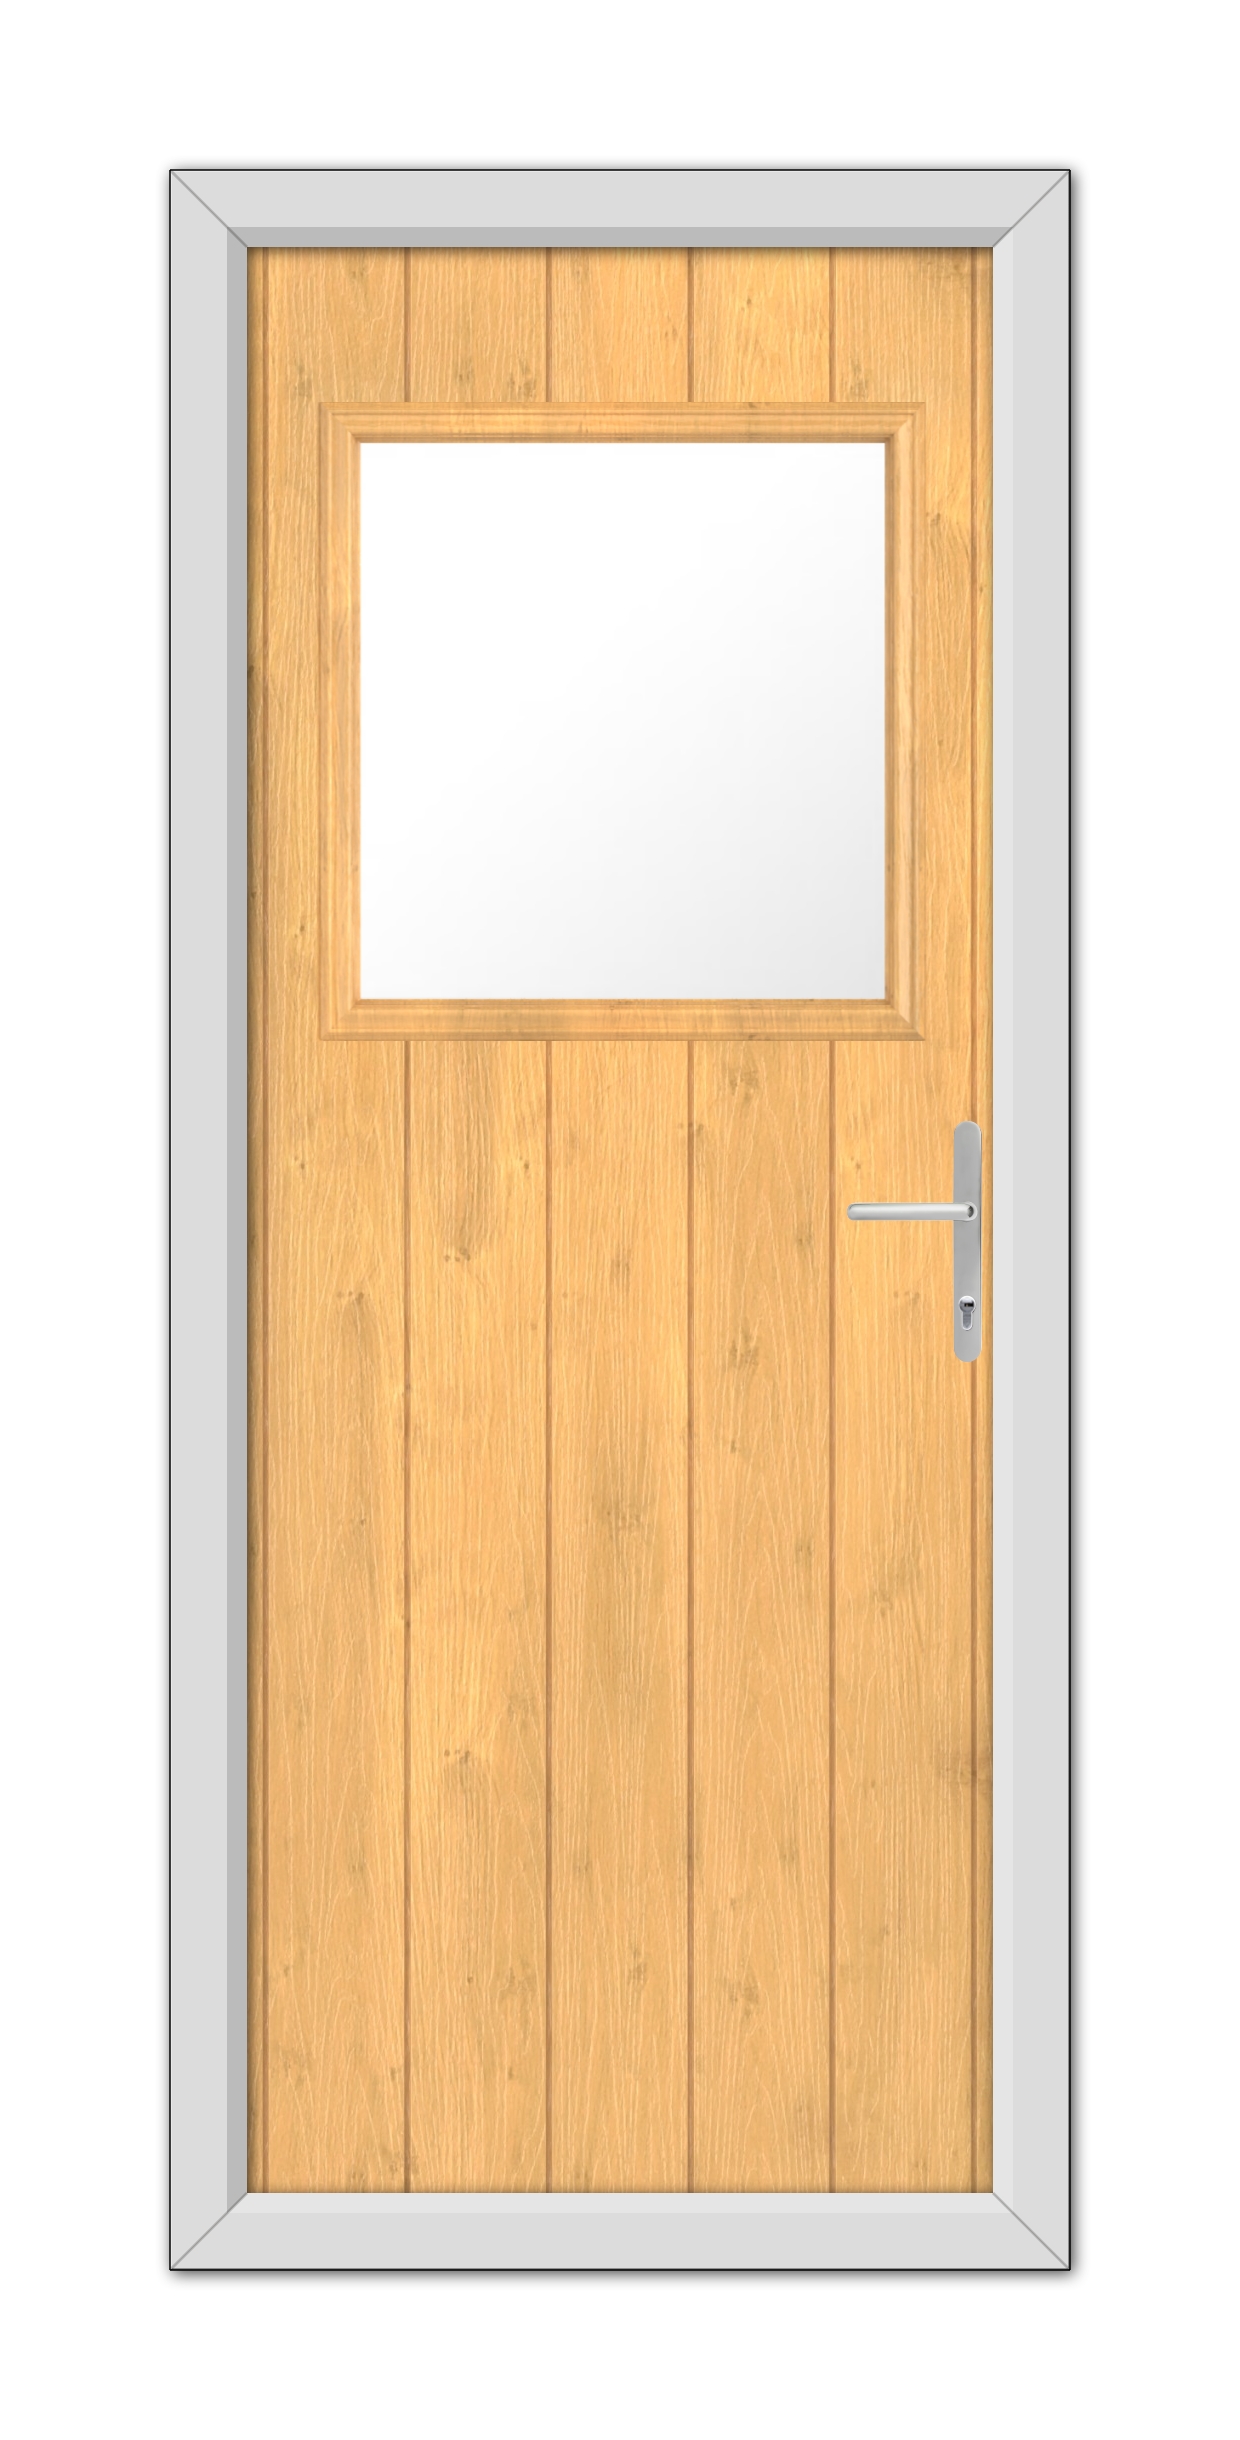 A Irish Oak Fife Composite Door 48mm Timber Core with a rectangular window and a metal handle, framed in a gray metallic doorframe, isolated on a white background.